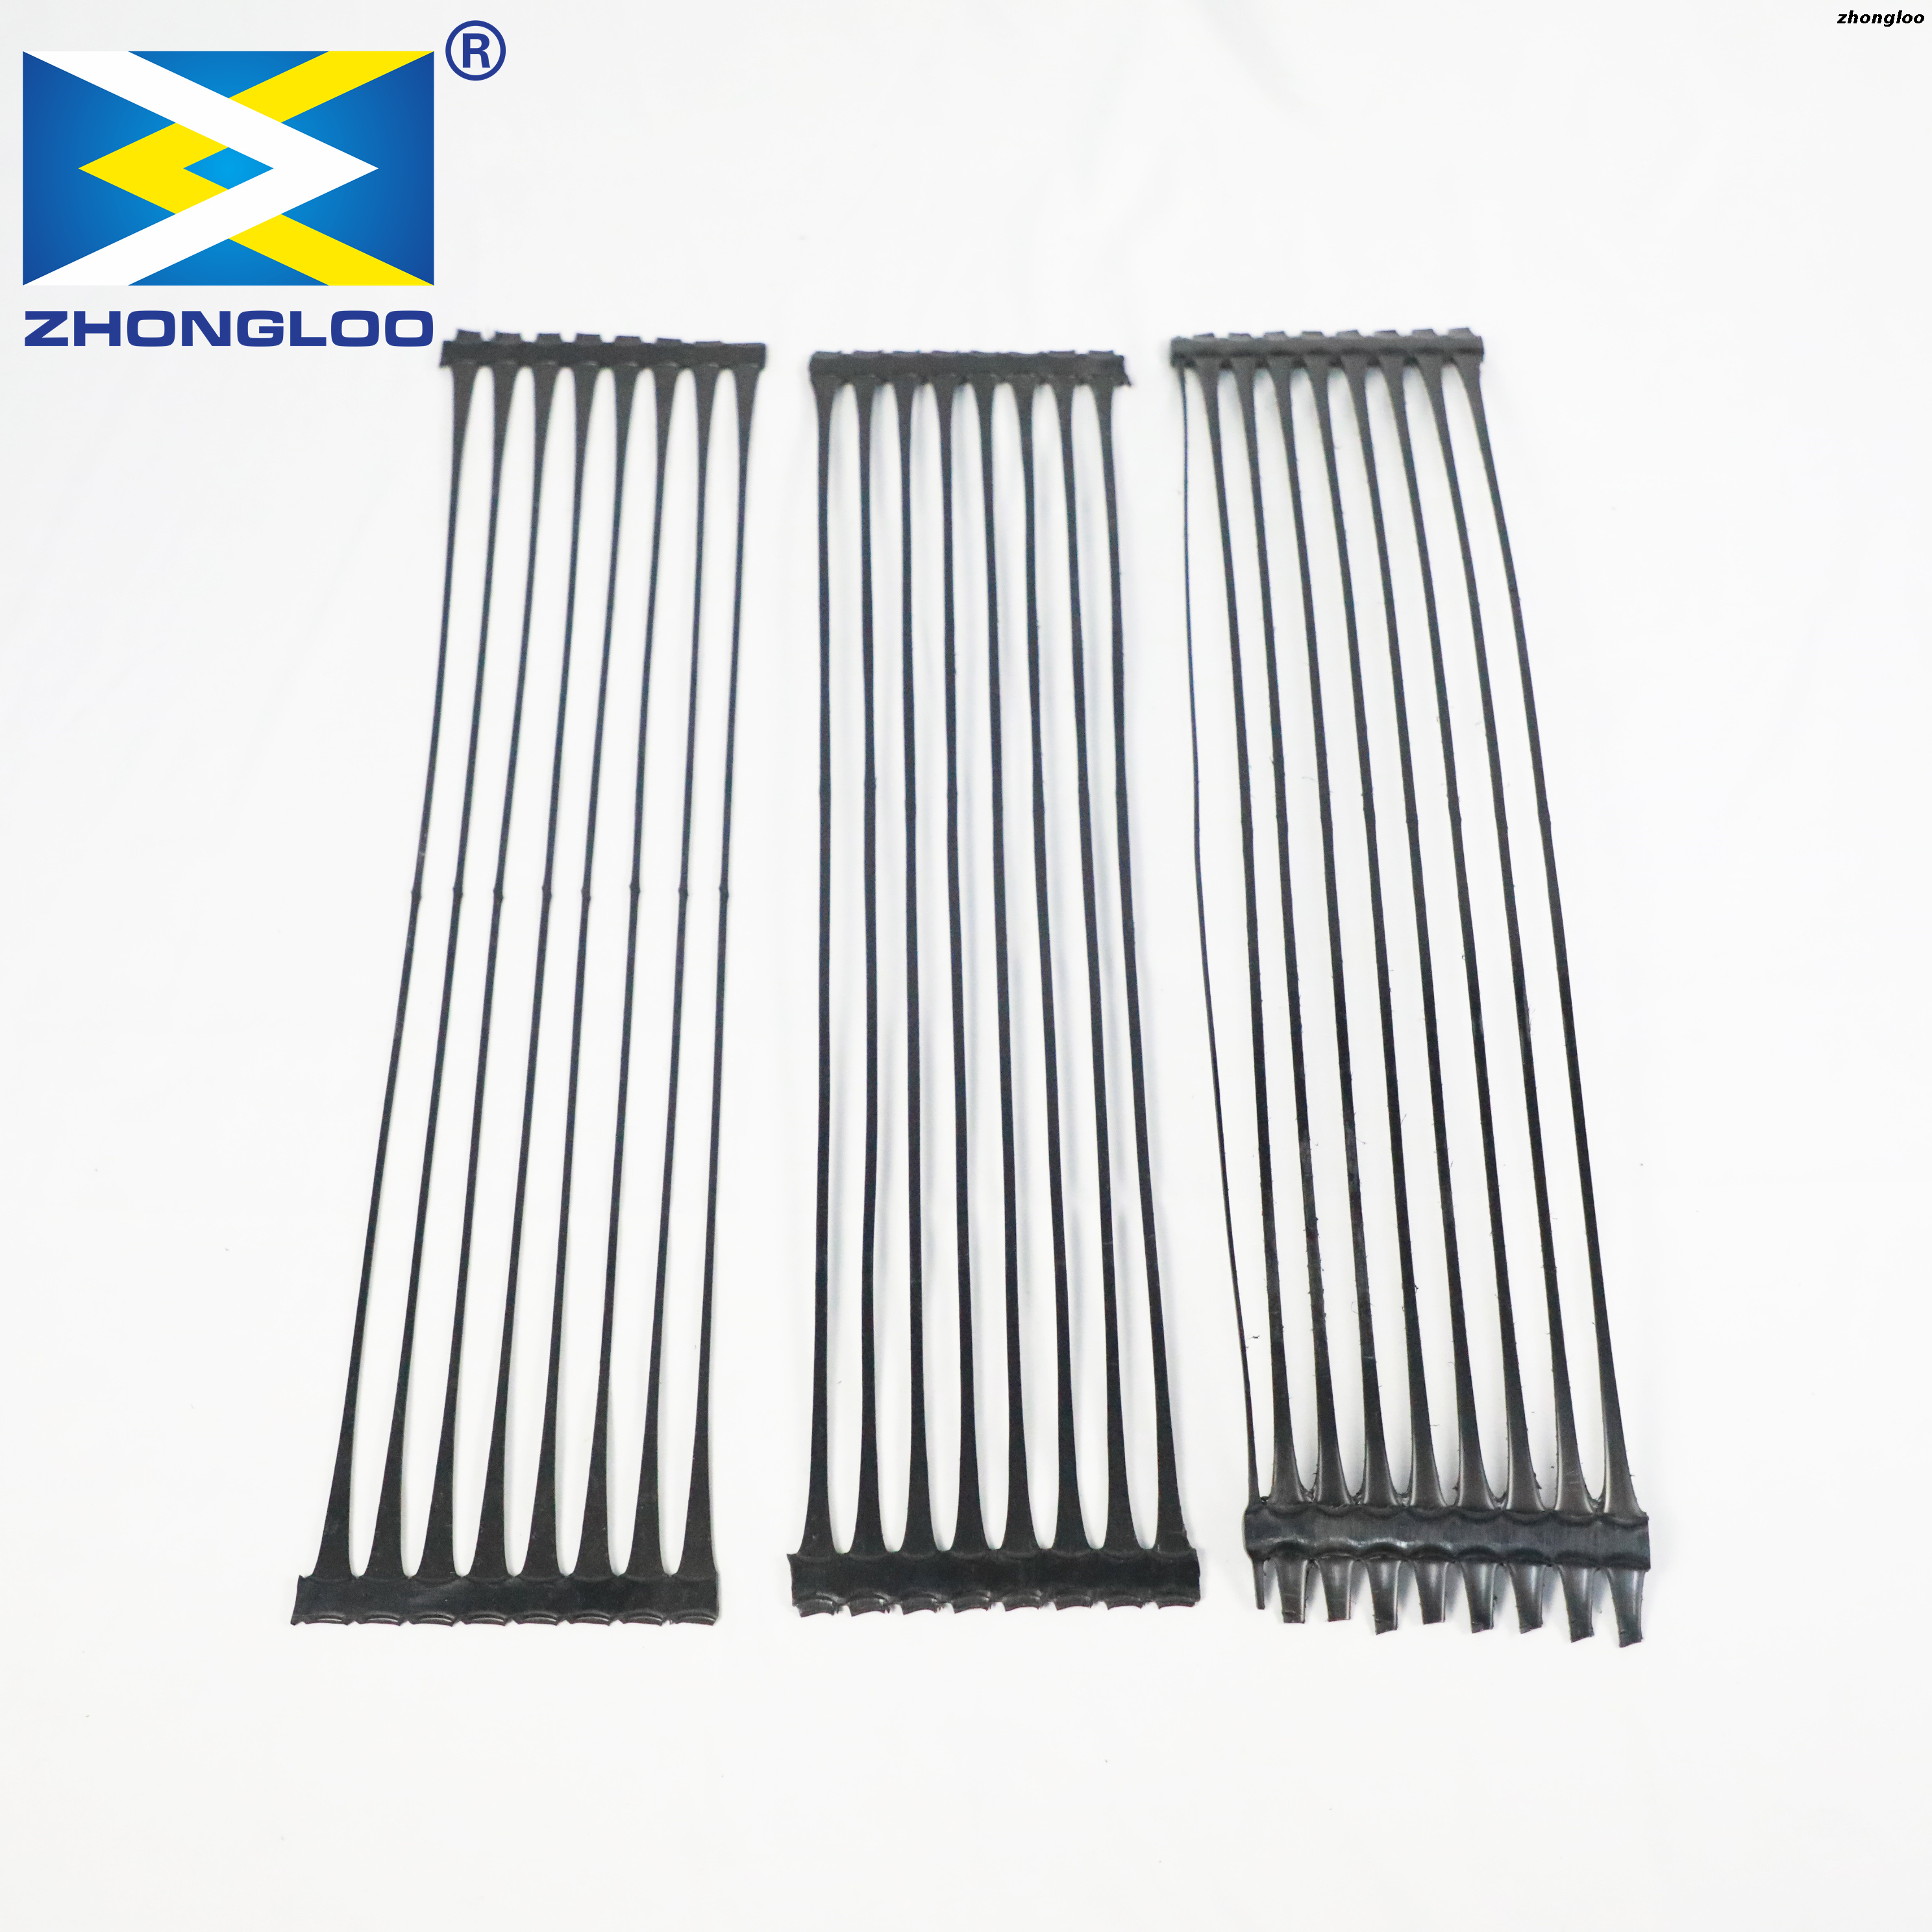 Unidirectional Stretch Plastic Geogrid of Manufacturer